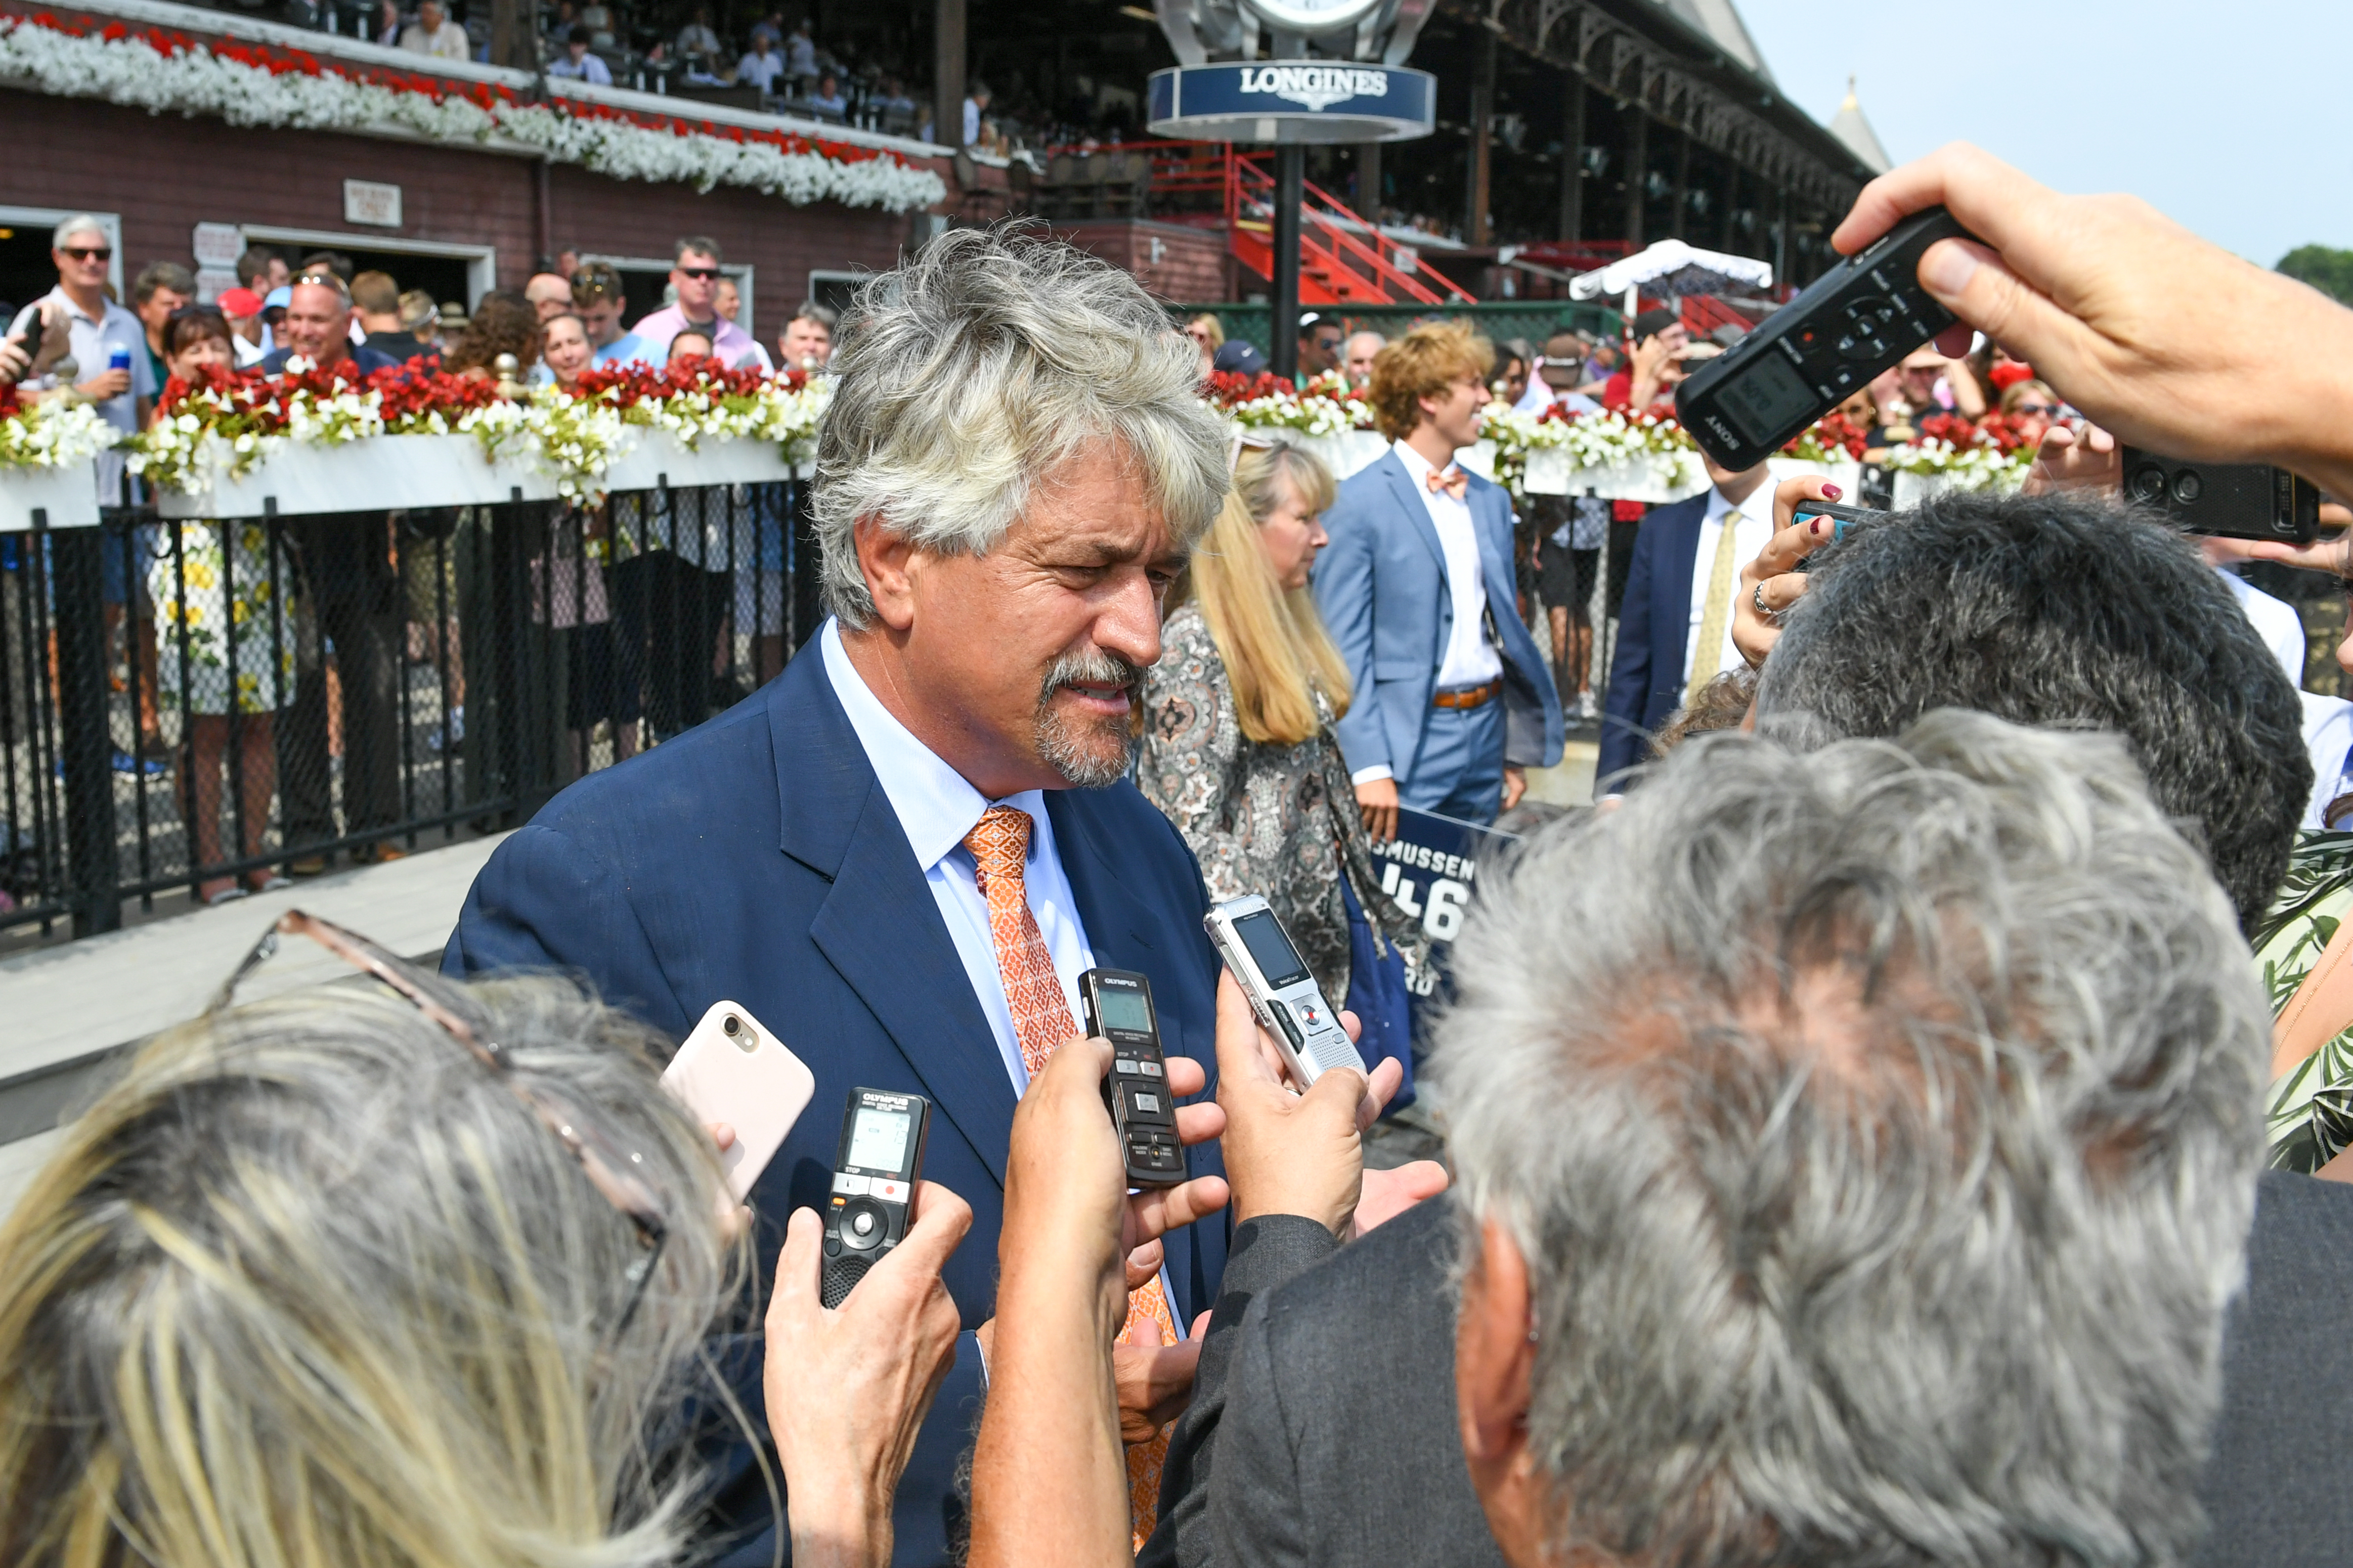 Steve Asmussen is interviewed after career win 9,446, setting a new North American record, at Saratoga Race Course, Aug. 7, 2021 (Bob Mayberger/Museum Collection)